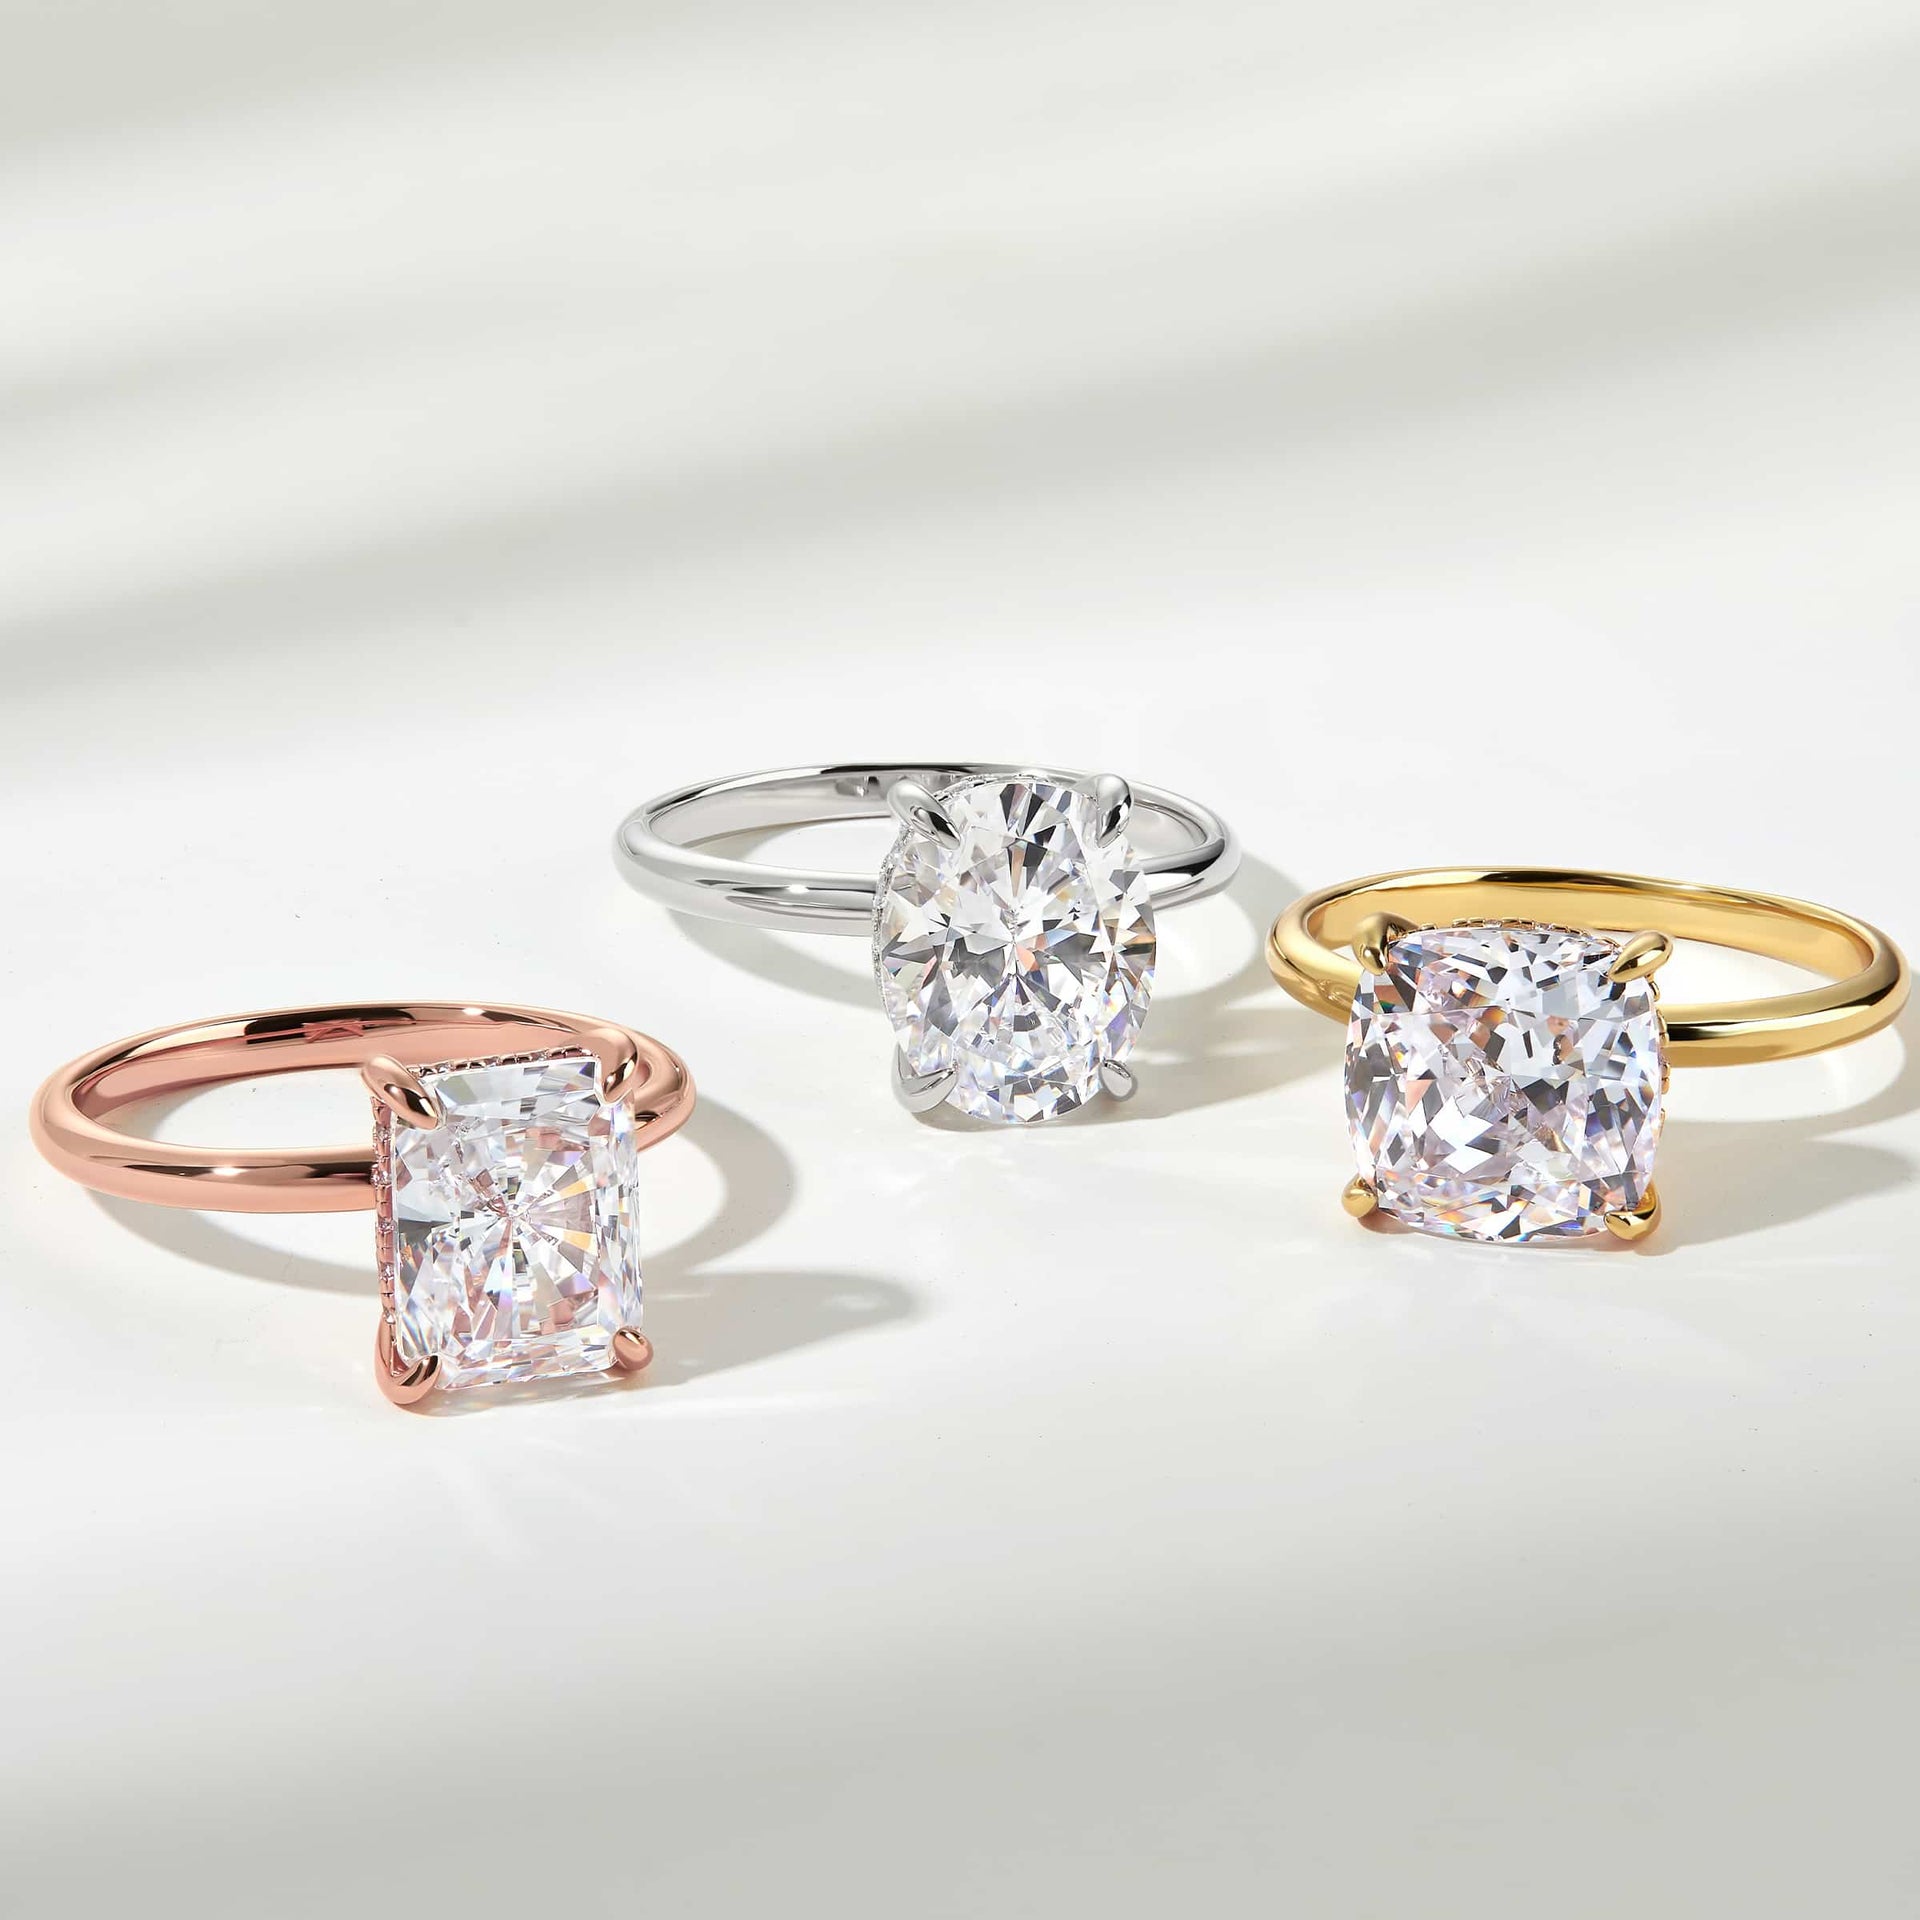 solitaire engagement rings in rose gold, silver, gold